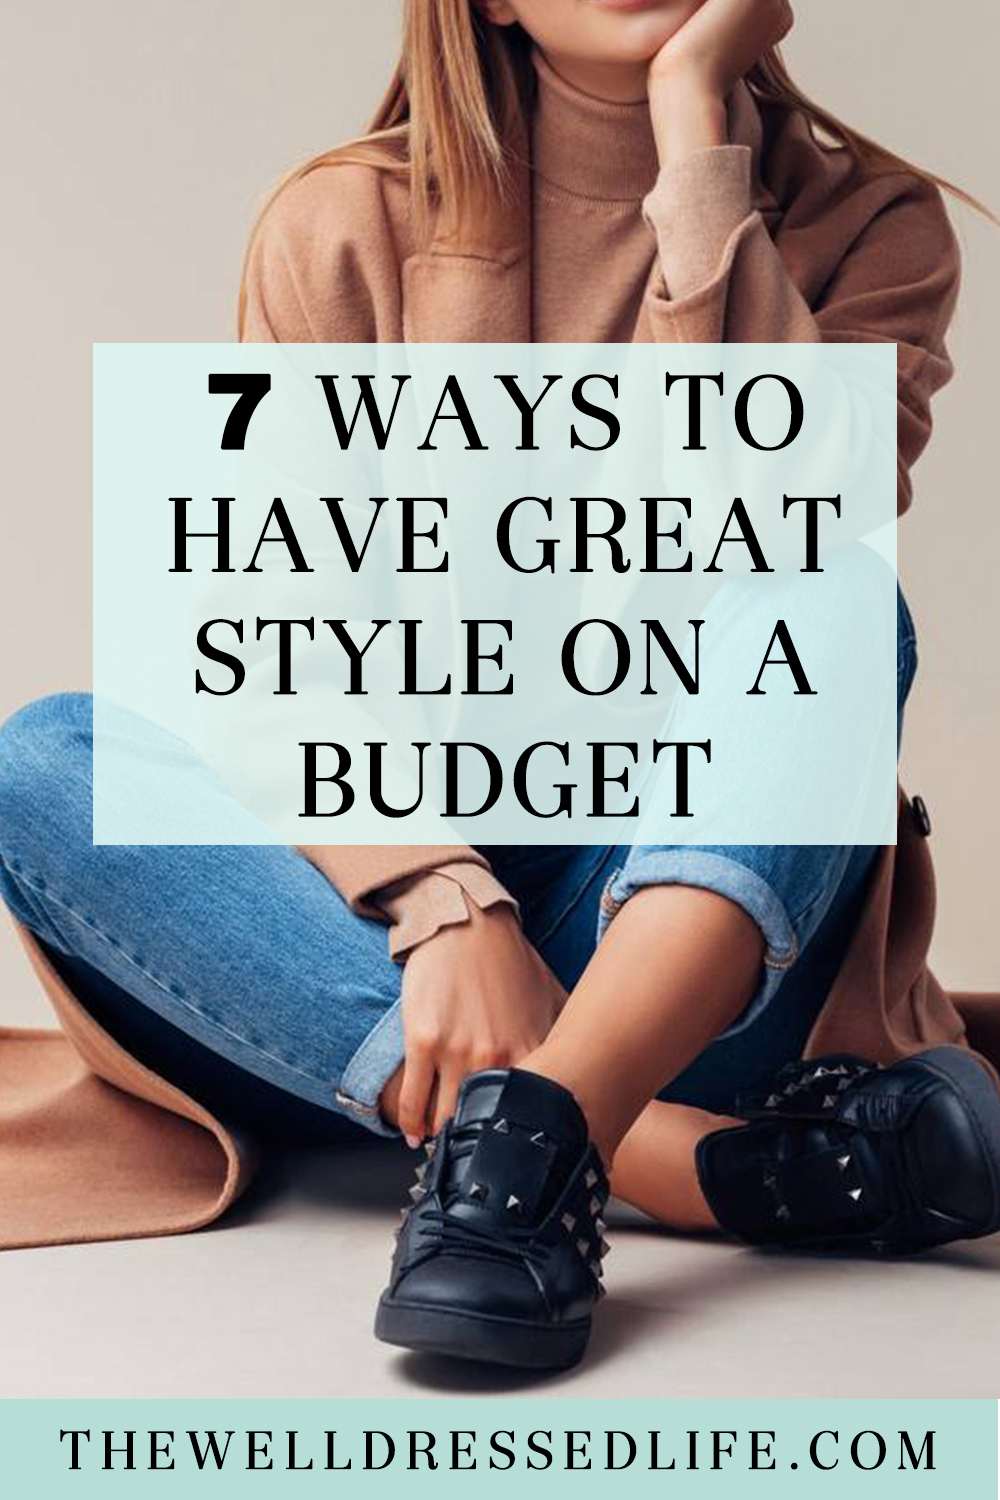 7 Ways to Have Great Style on a Budget